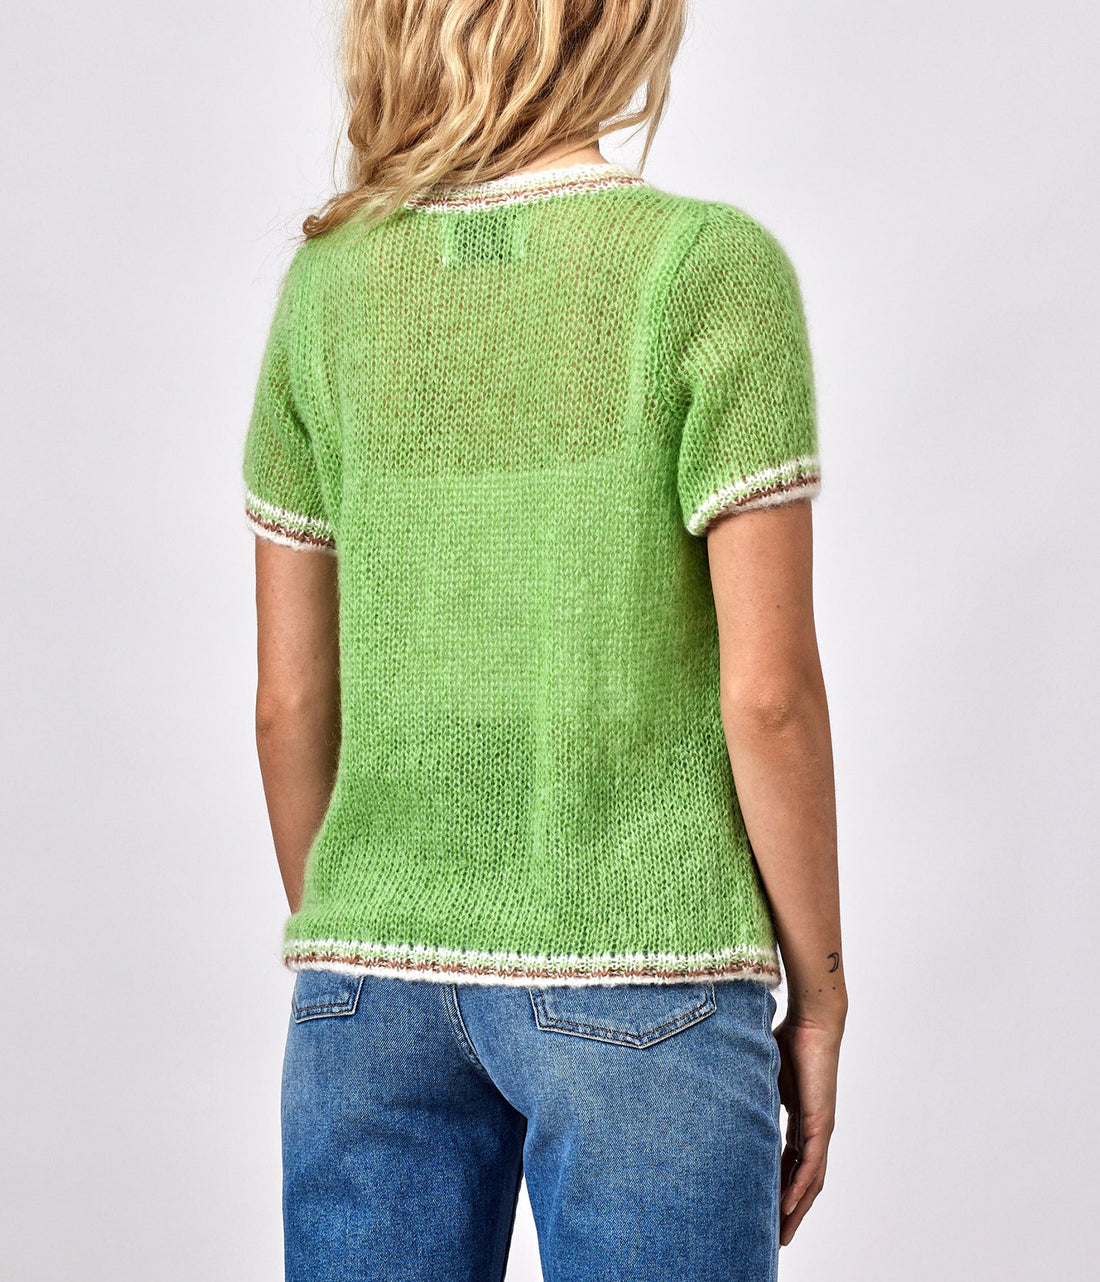 Aya knit lime green off white/rust trim